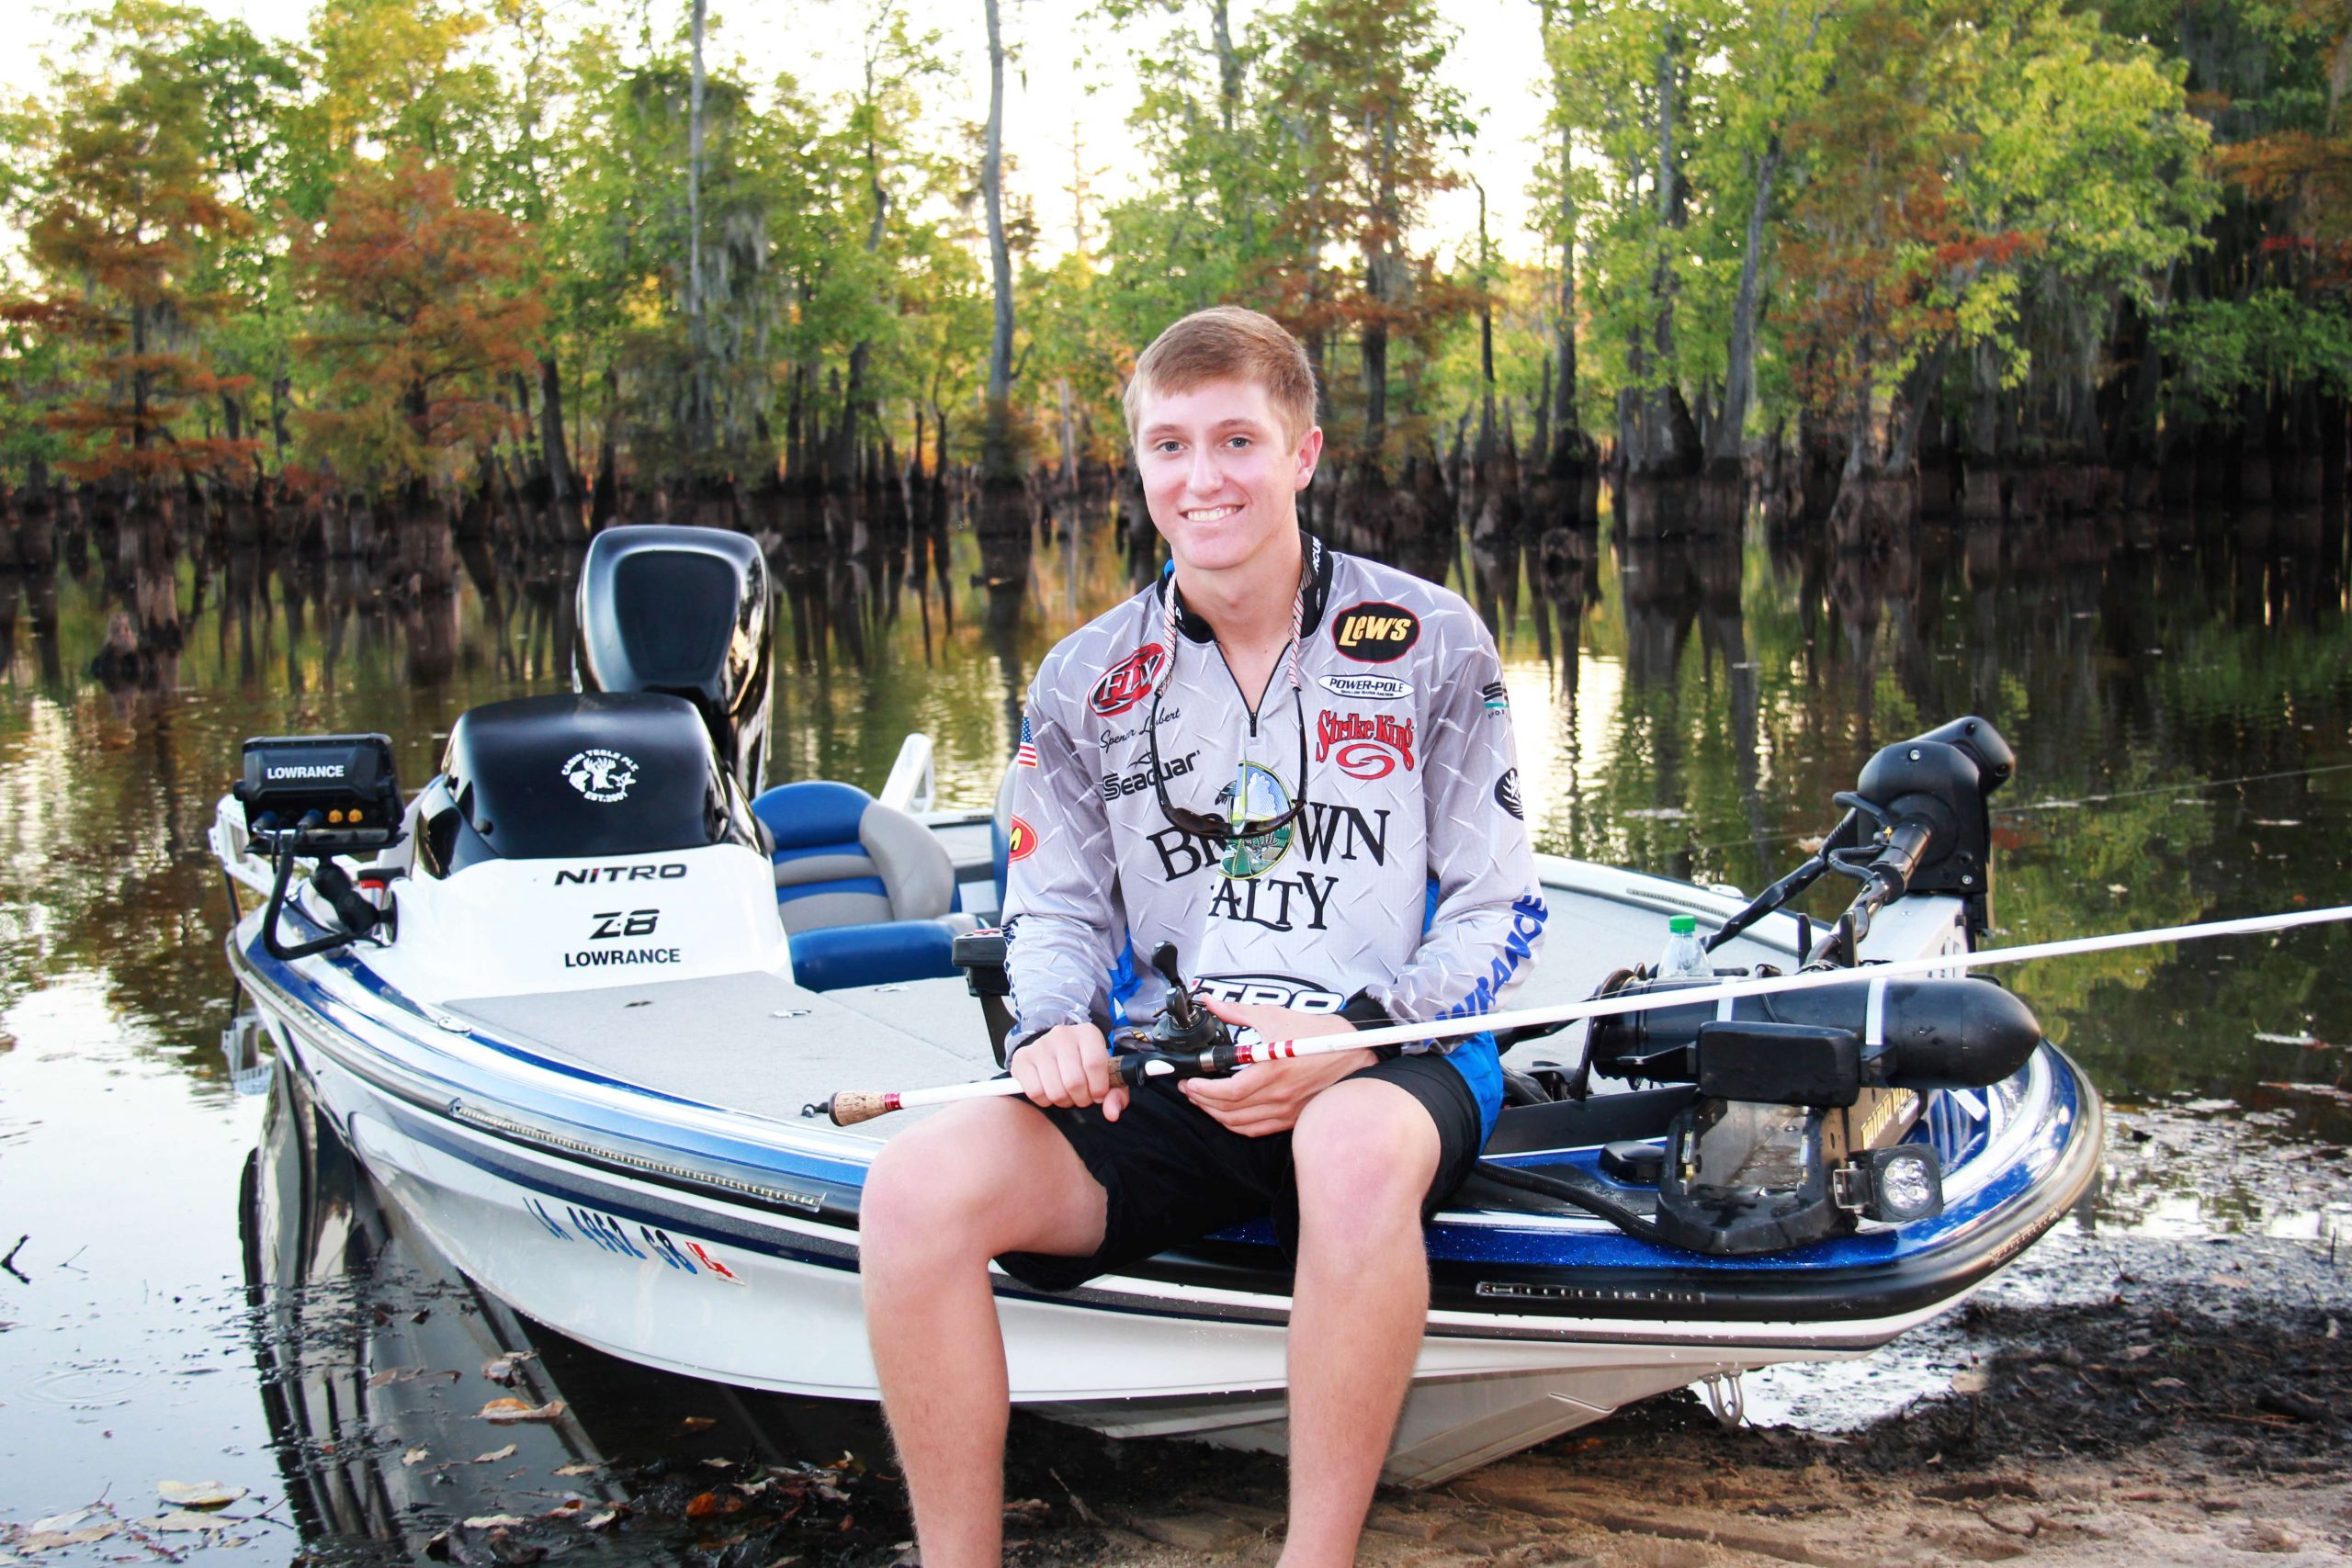 <p>Louisiana: Spencer Lambert</p>
<p>
Lambert is a senior at West Monroe High School. He and his partner won a club tournament in December 2014, and Lambert won the Fishers of Men Big Bass Classic in April 2014. He is a group leader at his church and helps run the Fishers of Men Legacy tournaments in his area. Lambert is a member of the National Honor Society.